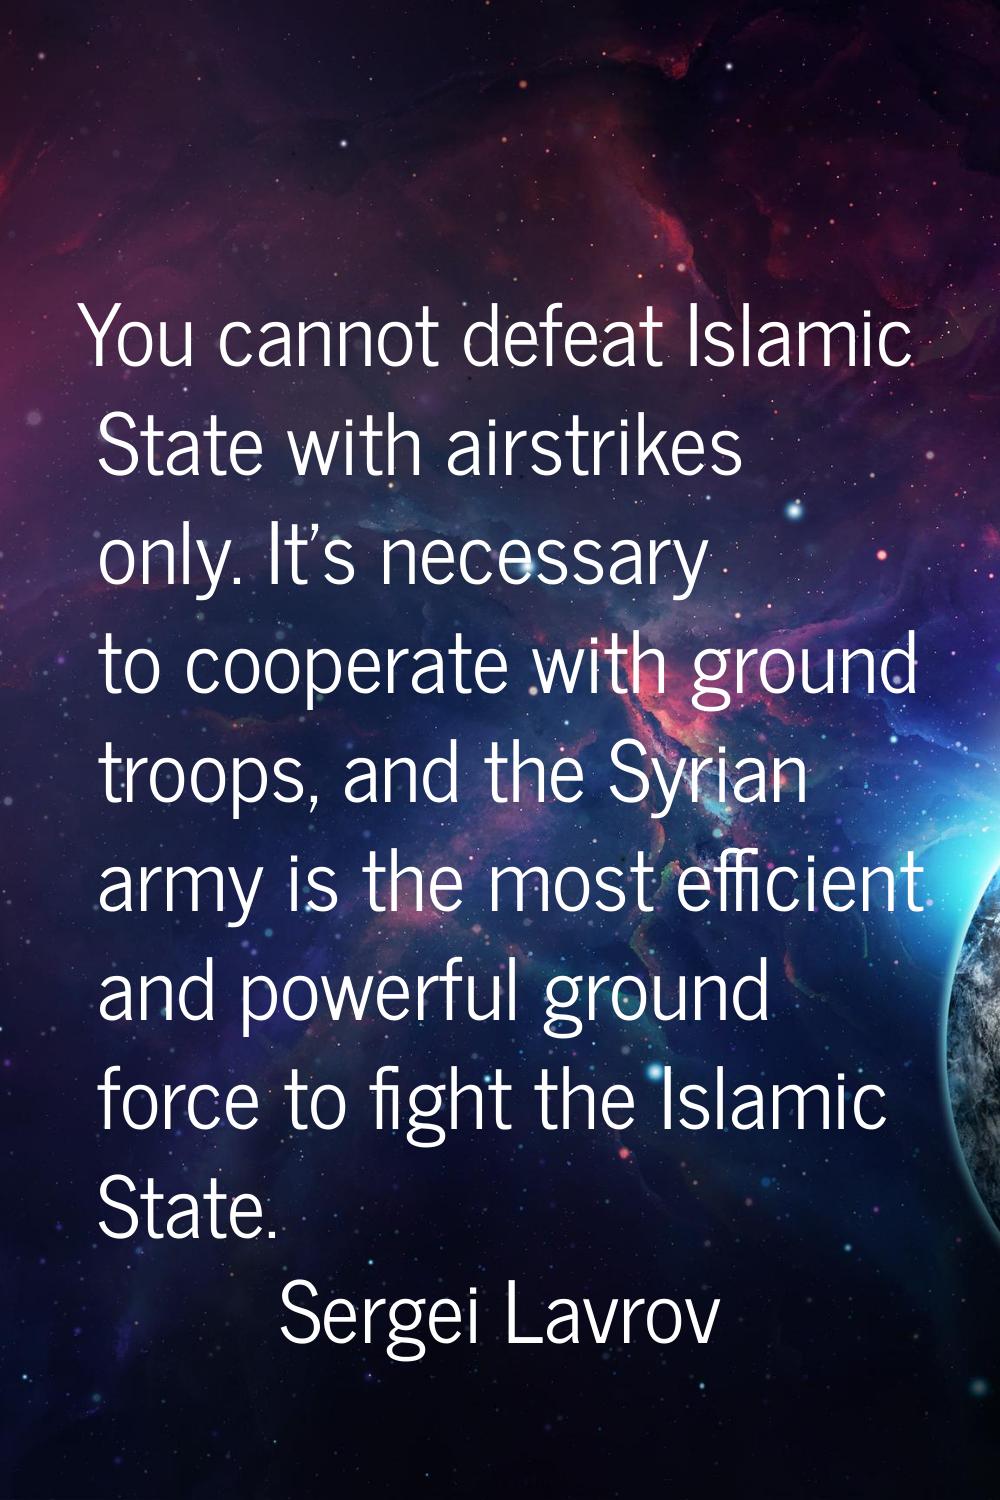 You cannot defeat Islamic State with airstrikes only. It's necessary to cooperate with ground troop